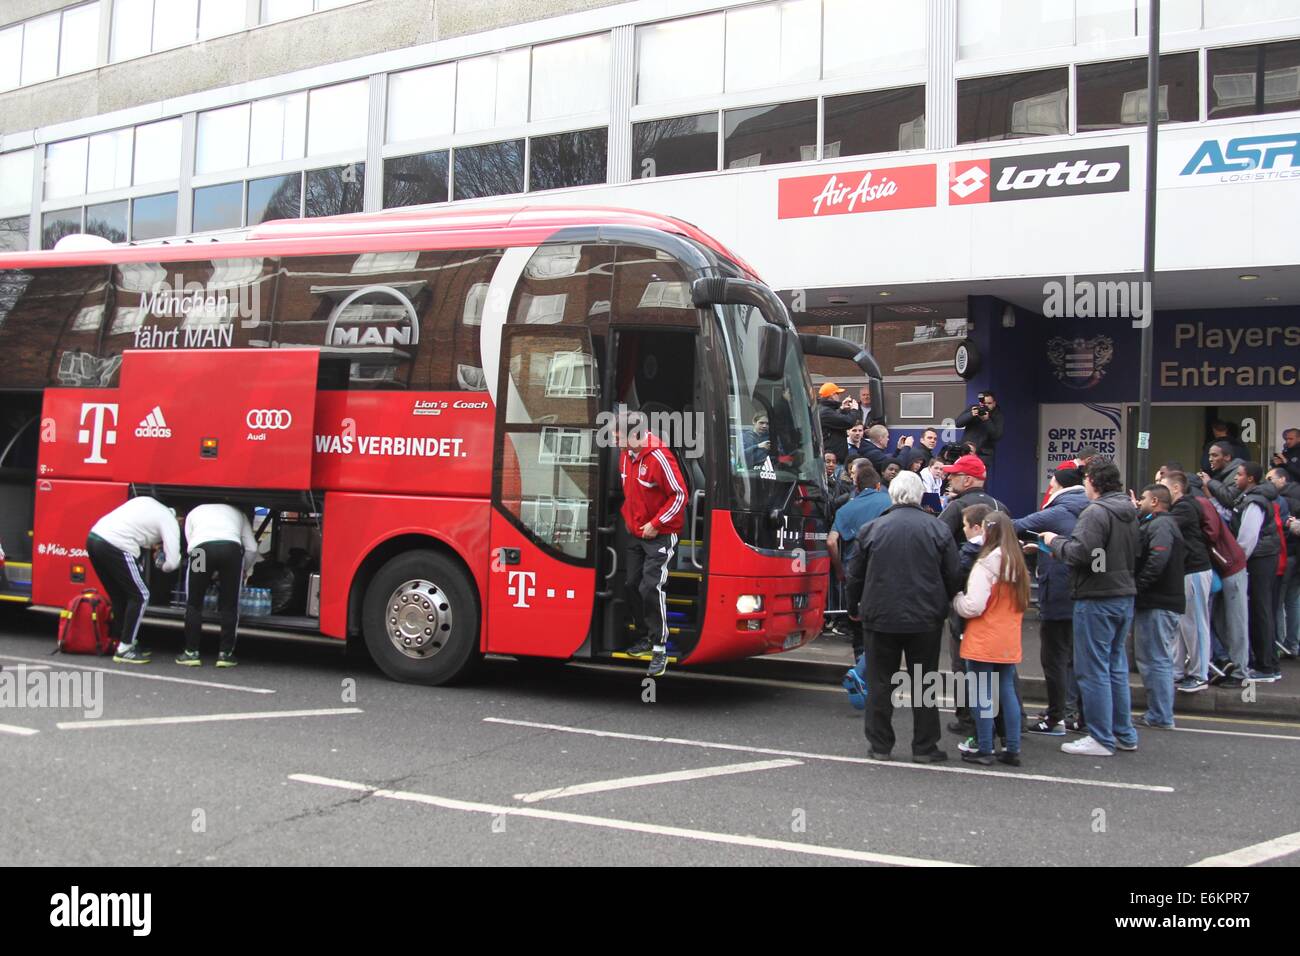 Bayern Munich arrive at Lotus Road, home of Queens Park Rangers, for a training session prior to their UEFA Champions League match with Arsenal FC  Featuring: Atmosphere Where: London, United Kingdom When: 19 Feb 2014 Stock Photo